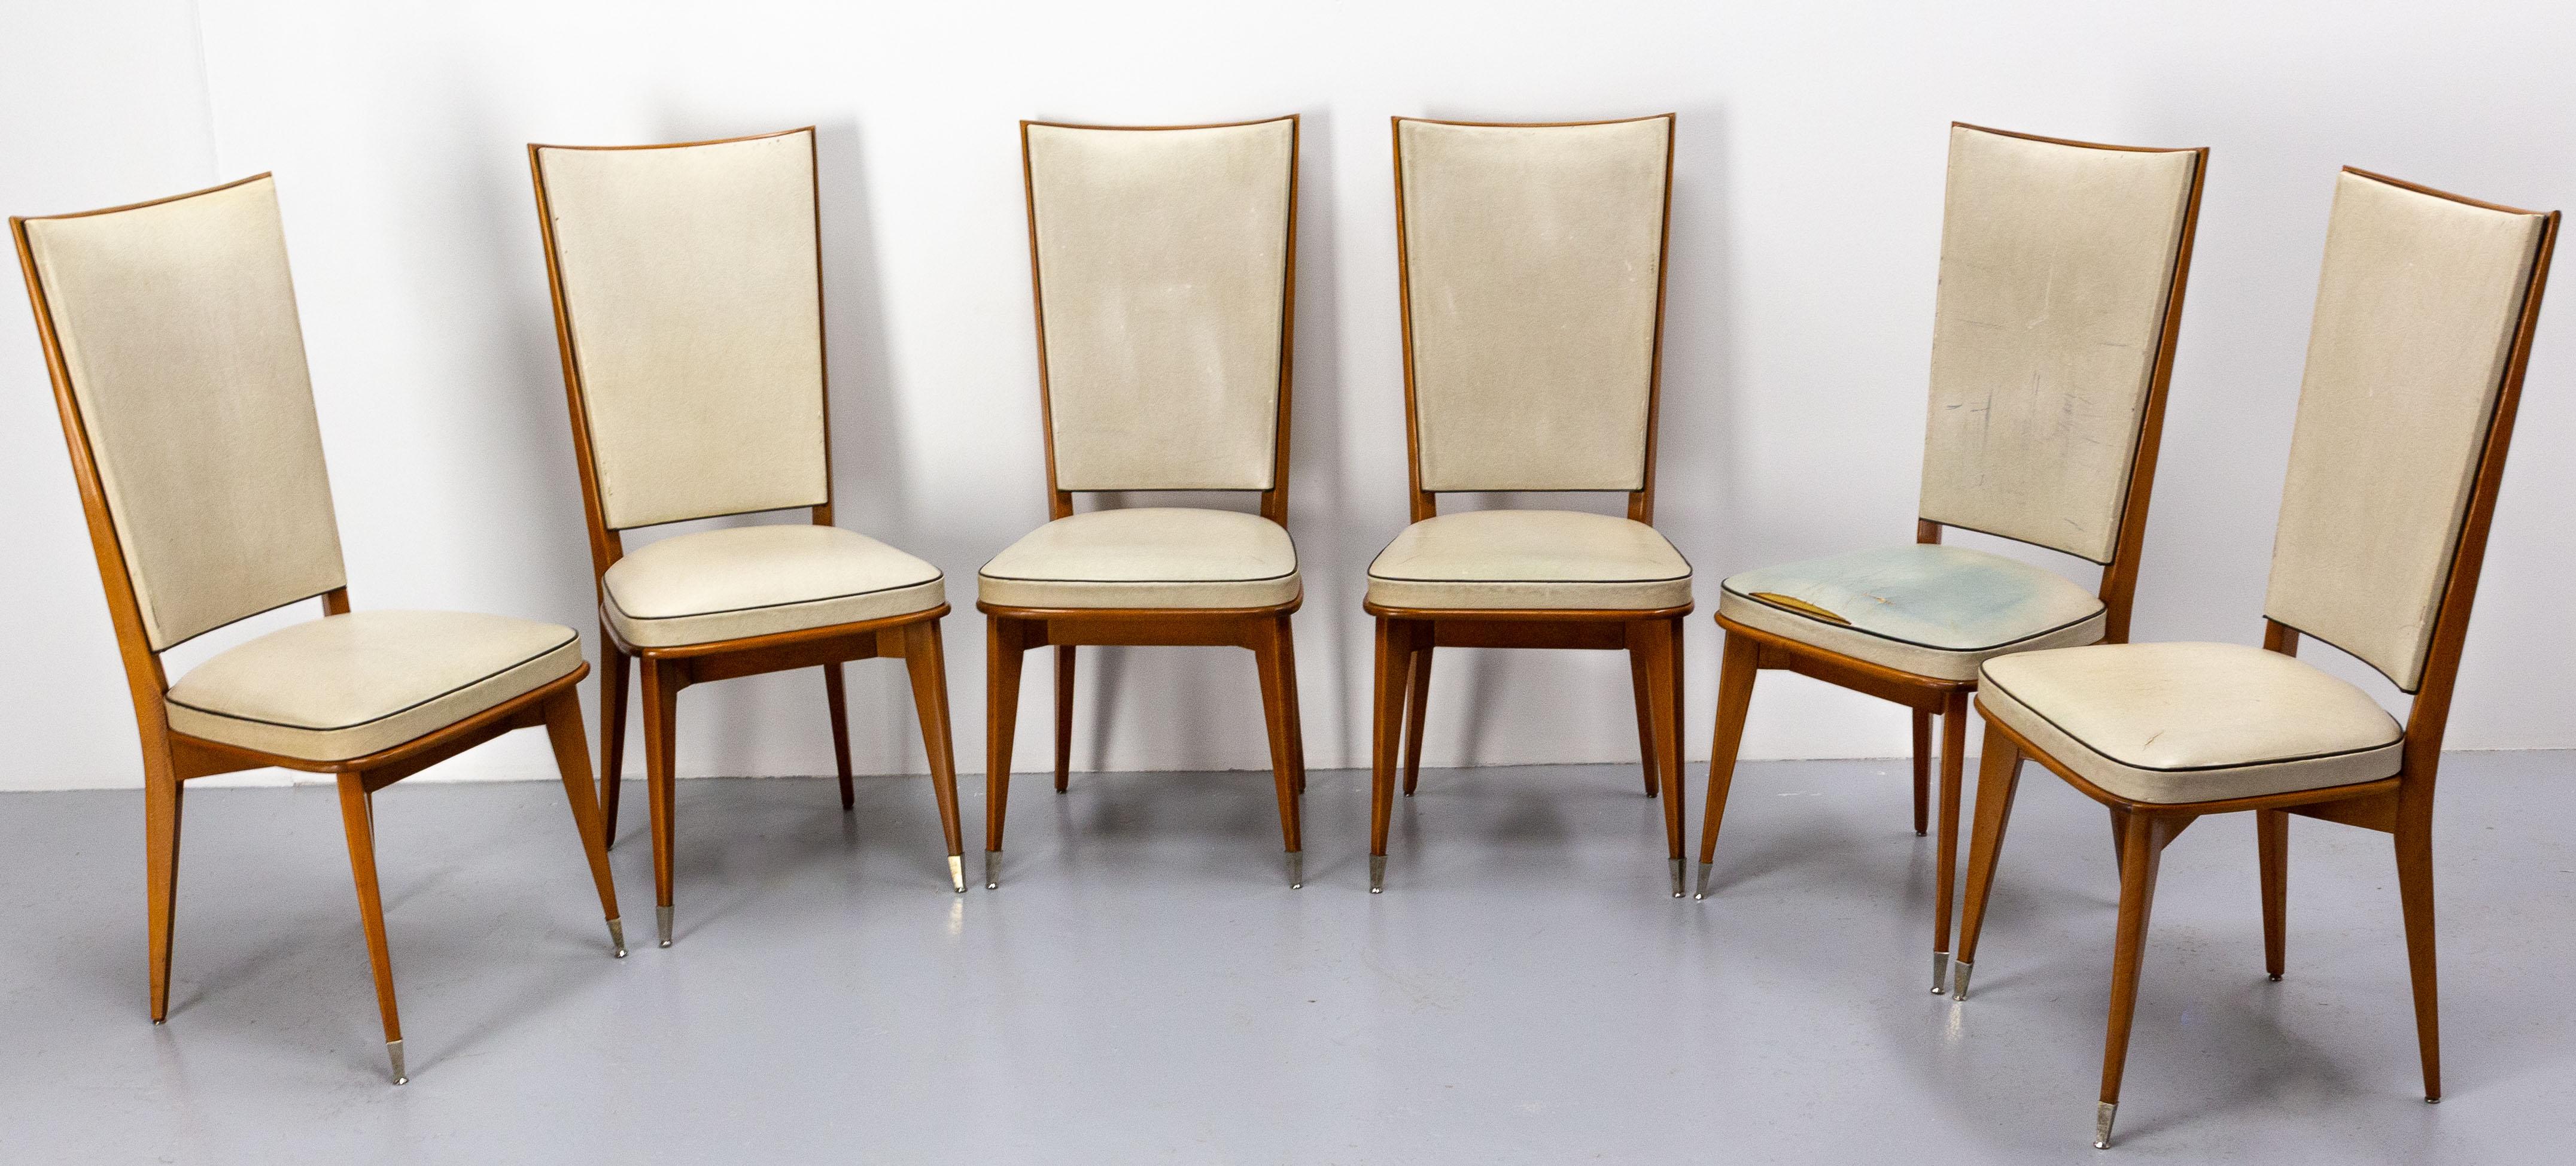 Mid-Century Modern Six Dining Chairs Beech and Skai to Recover Midcentury French, circa 1950 For Sale